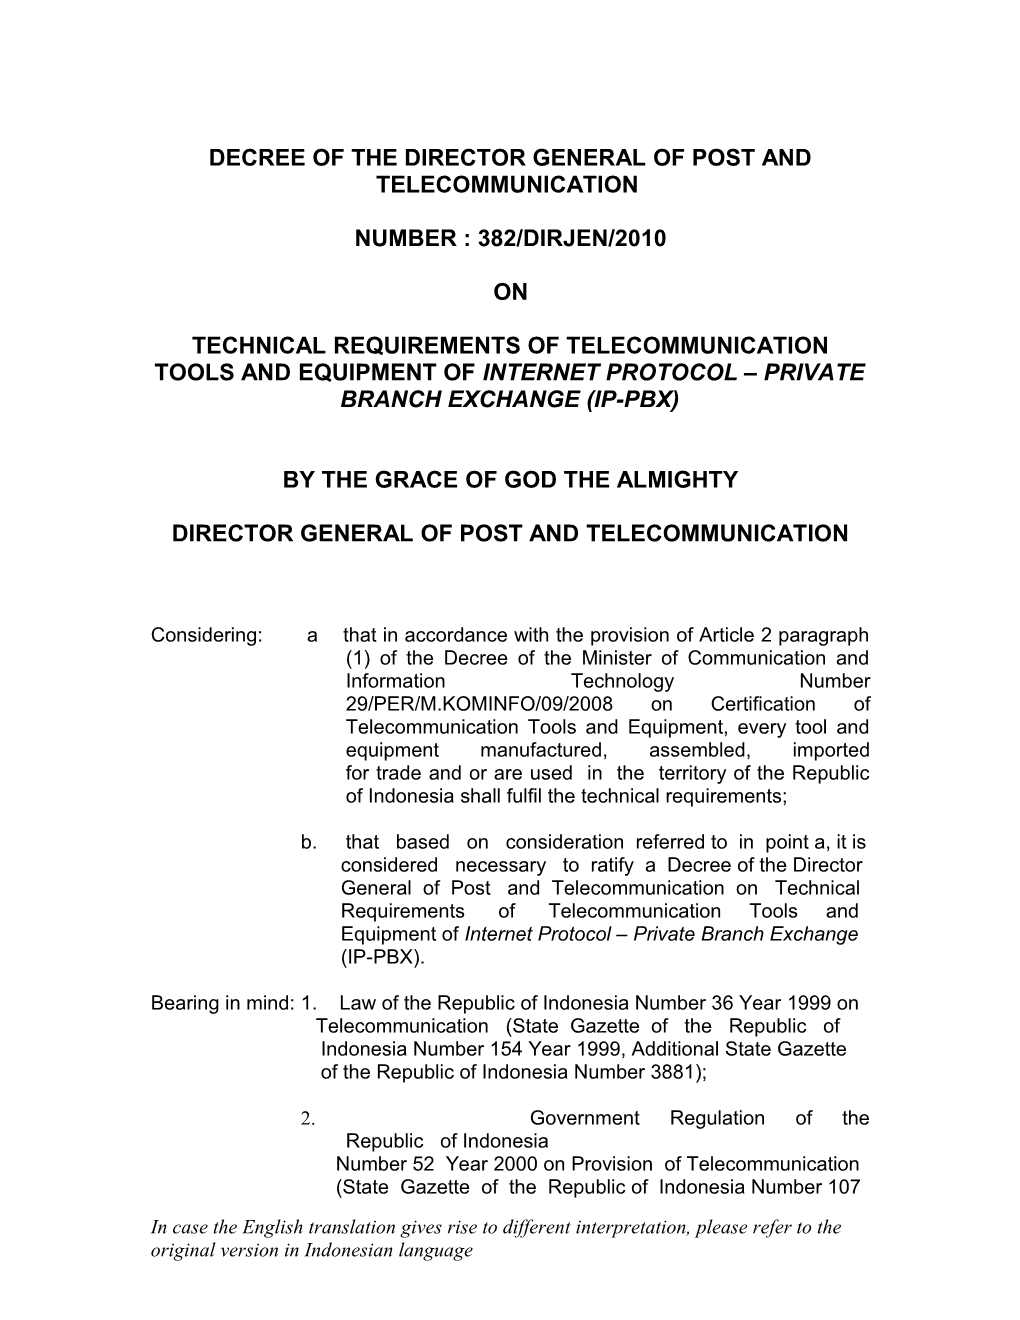 Decree of the Director General of Post and Telecommunication s1